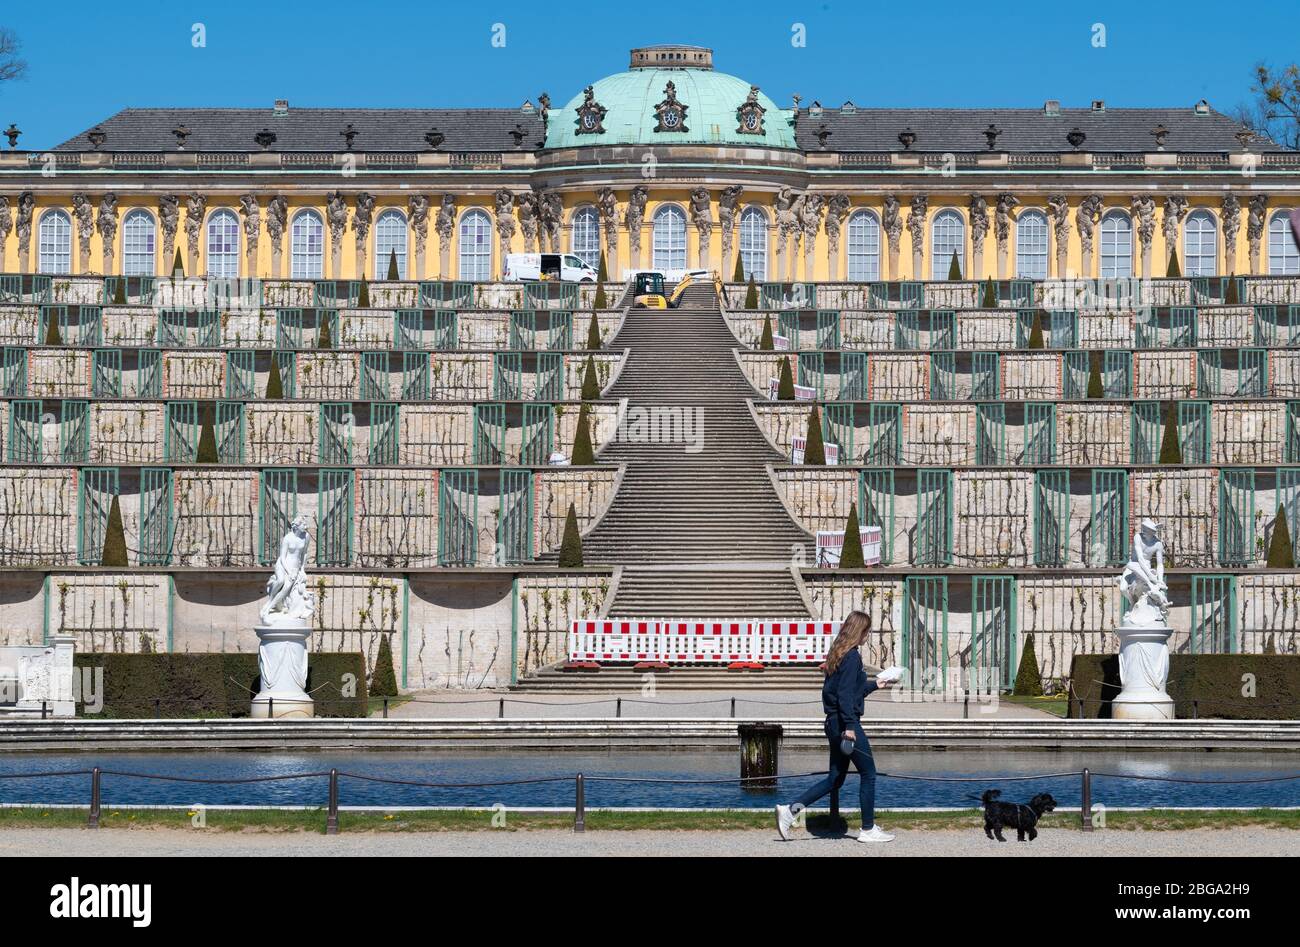 20 April 2020, Brandenburg, Potsdam: A red and white barrier is placed in front of the stairs below the vineyard terraces of Sanssouci Castle. Workers have begun the restoration of the central axis on behalf of the Prussian Palaces and Gardens Foundation Berlin-Brandenburg (SPSG). The treads between the terrace stairs are to be fortified with bound stones, thus preserving the historic sandstone steps. Up to now, the stairs have also been subject to heavy wear and tear due to gravel that has entered shoe treads. According to the foundation, the work is expected to be completed on 20 May 2020. P Stock Photo